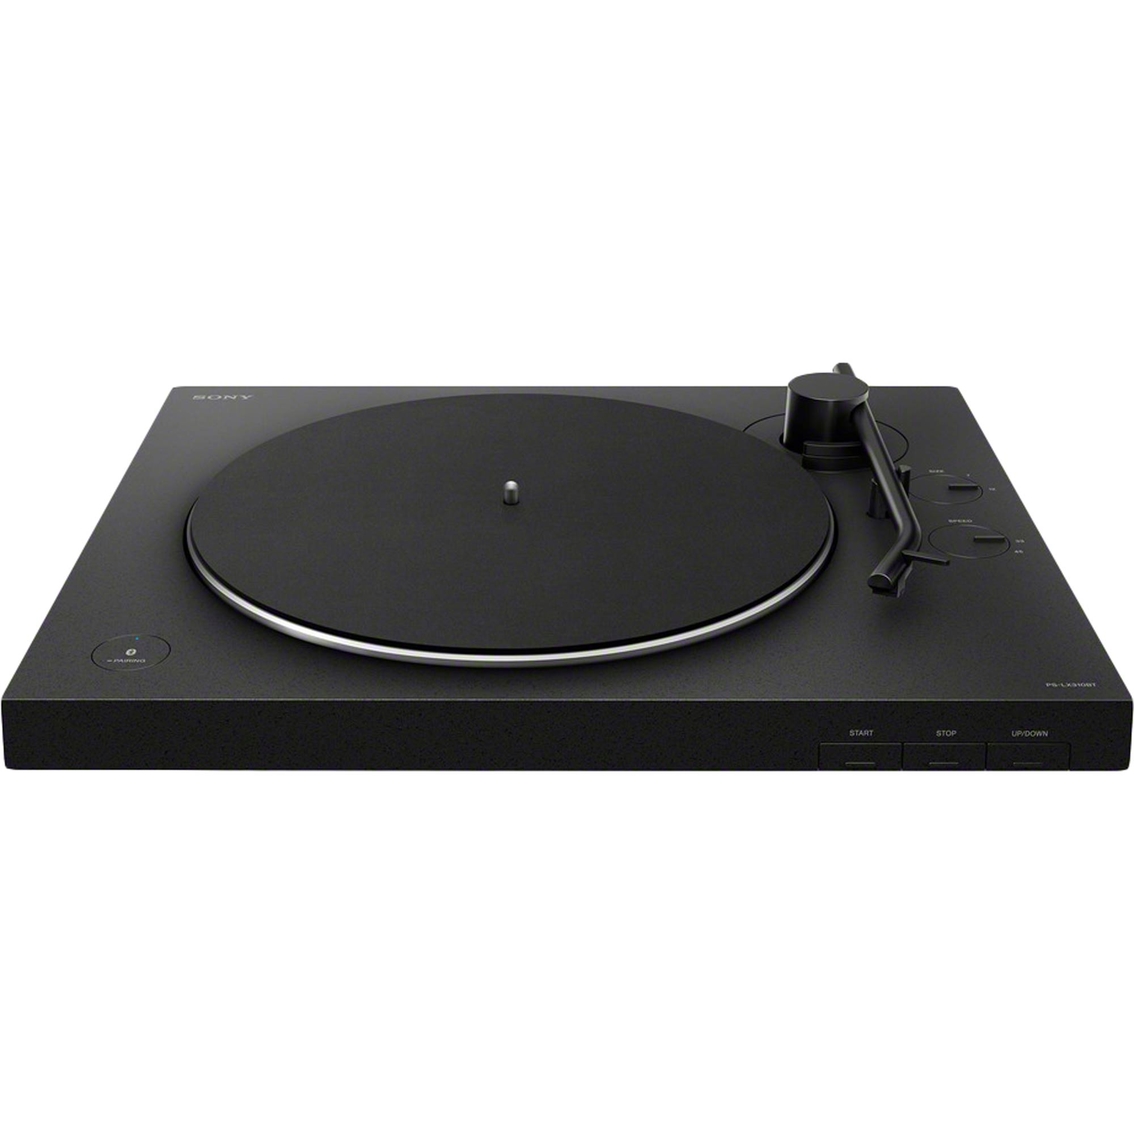 Sony Wireless Bluetooth Turntable - Image 4 of 8